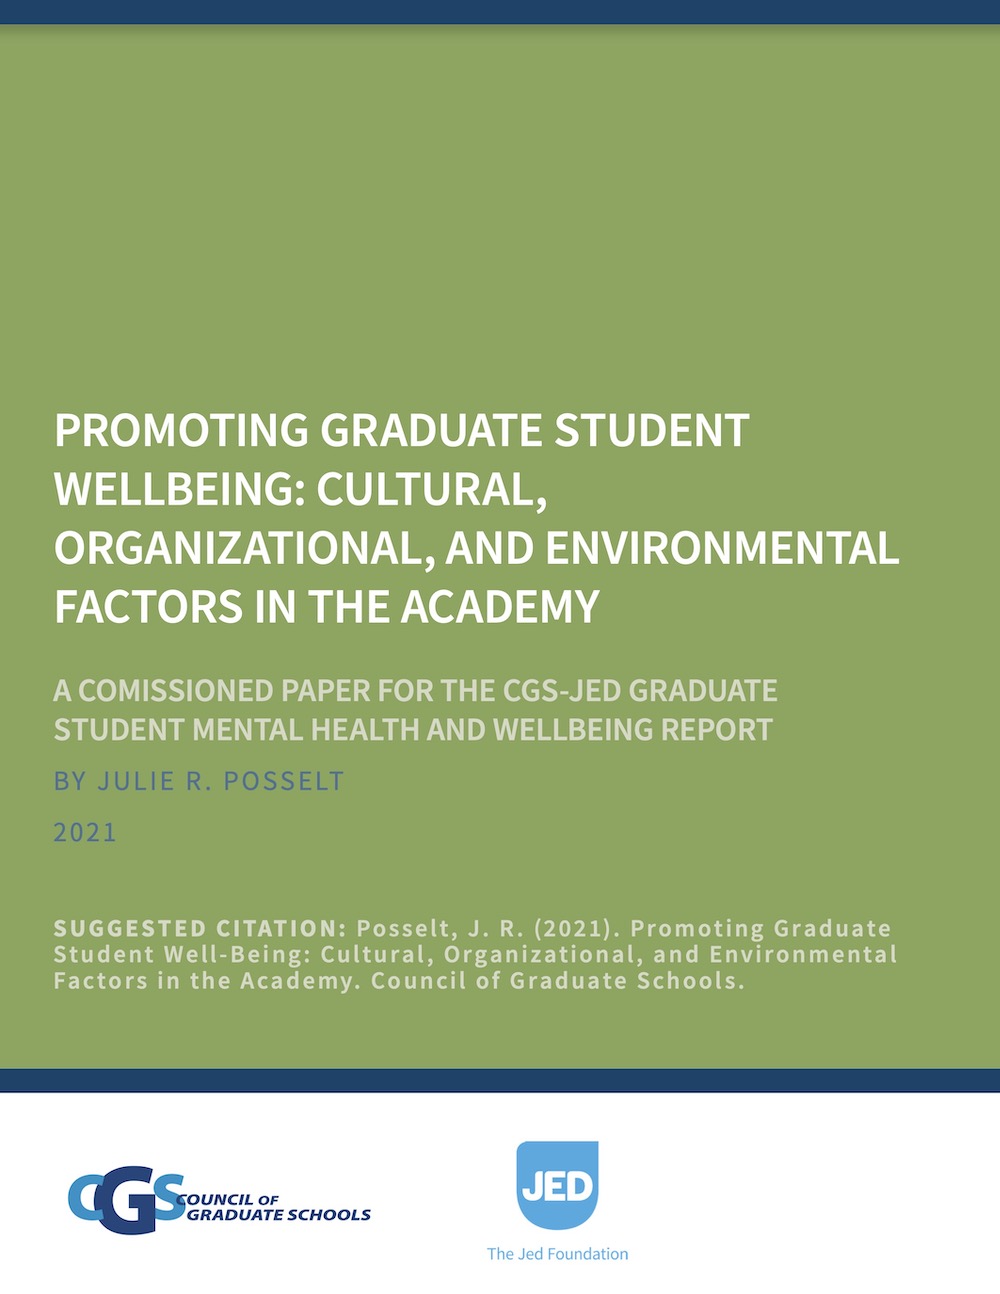 Promoting Graduate Student Wellbeing: Cultural, Organizational, and Environmental Factors in the Academy